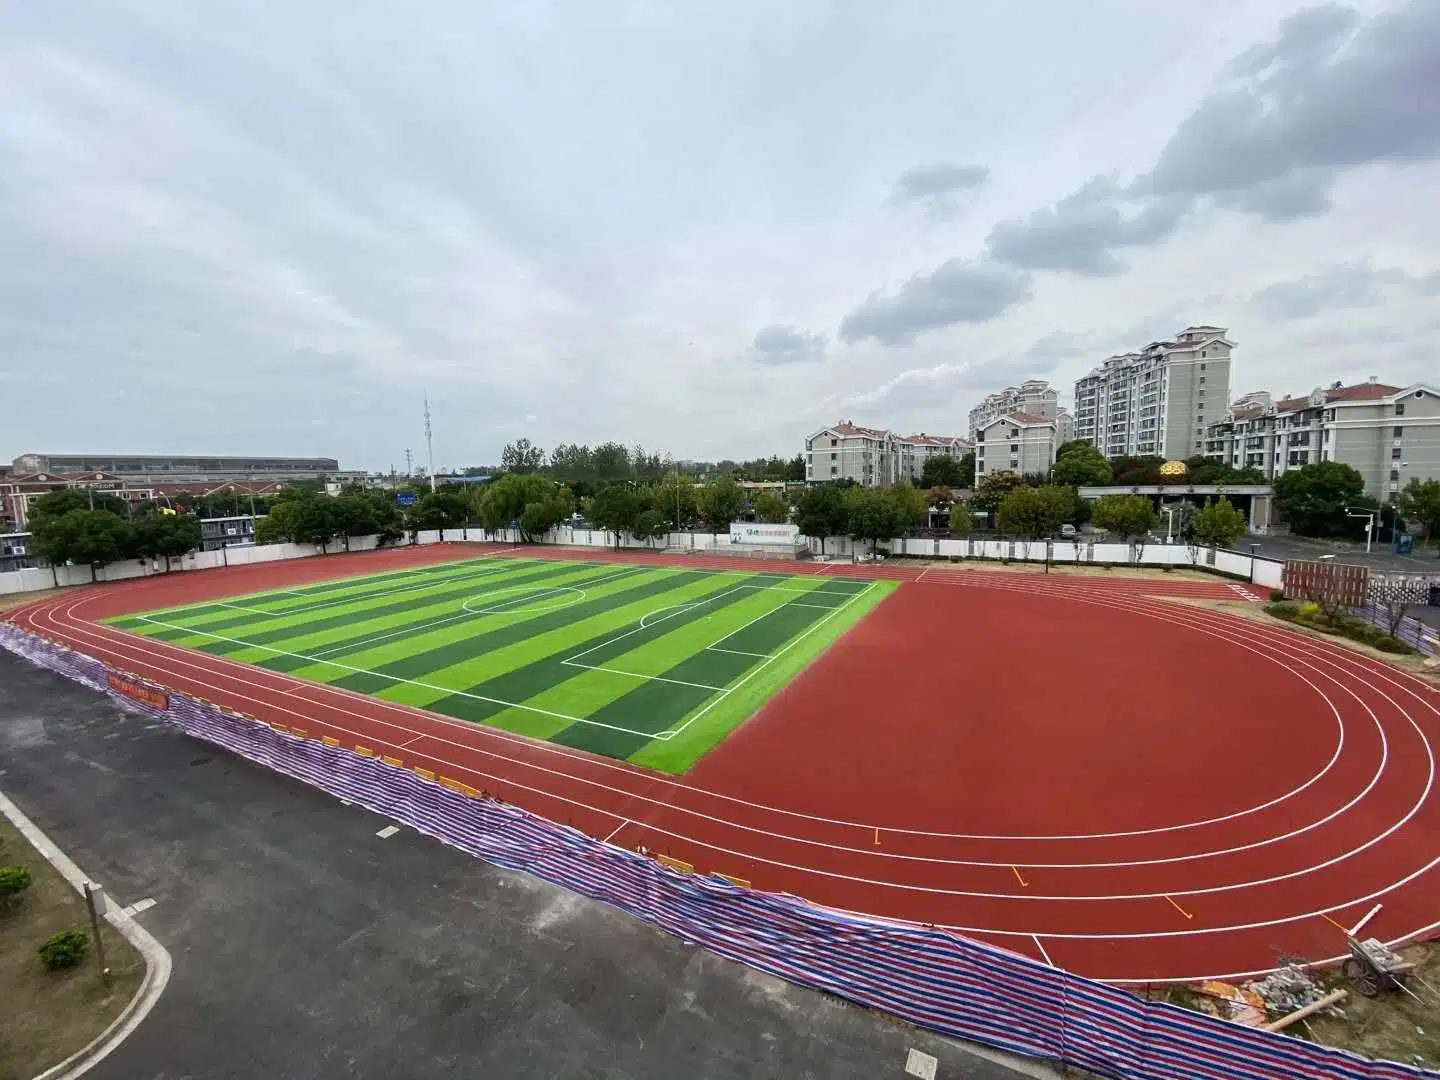 Iaaf Approved Polyurethane Rubber Running Track Surface Material Spray Coating